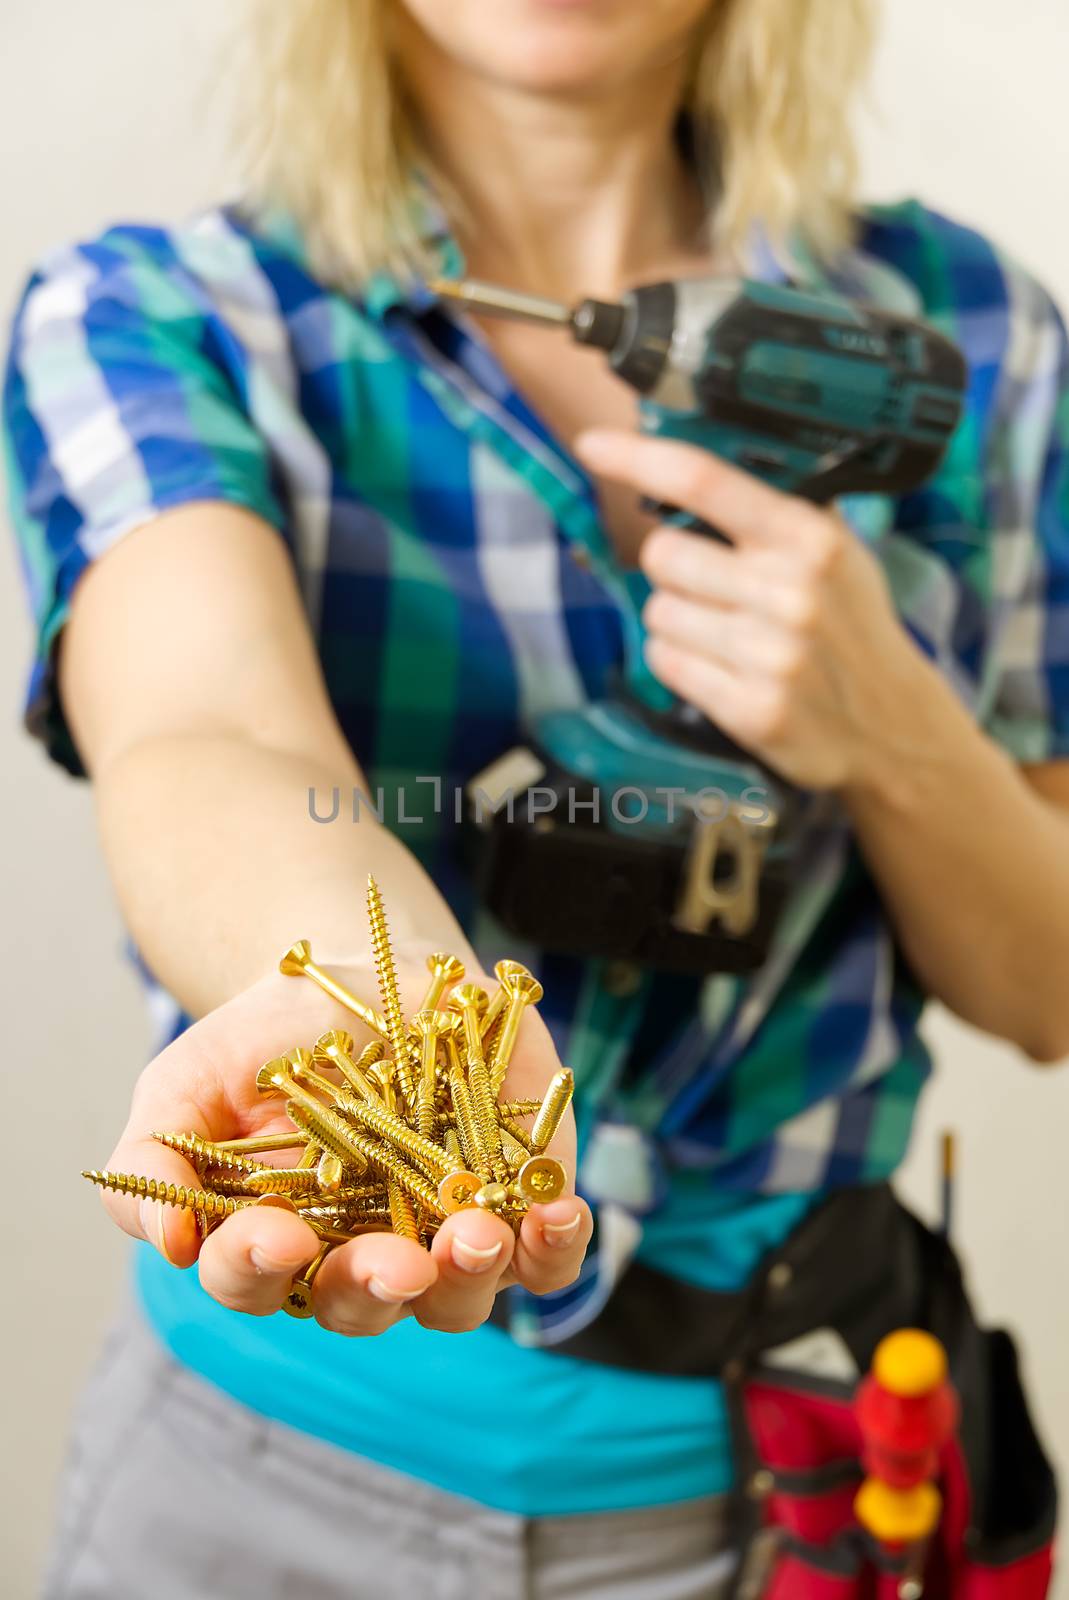 Female hands holding a handful of screws Hands show the golden screws . Home work, handywoman concept. by PhotoTime